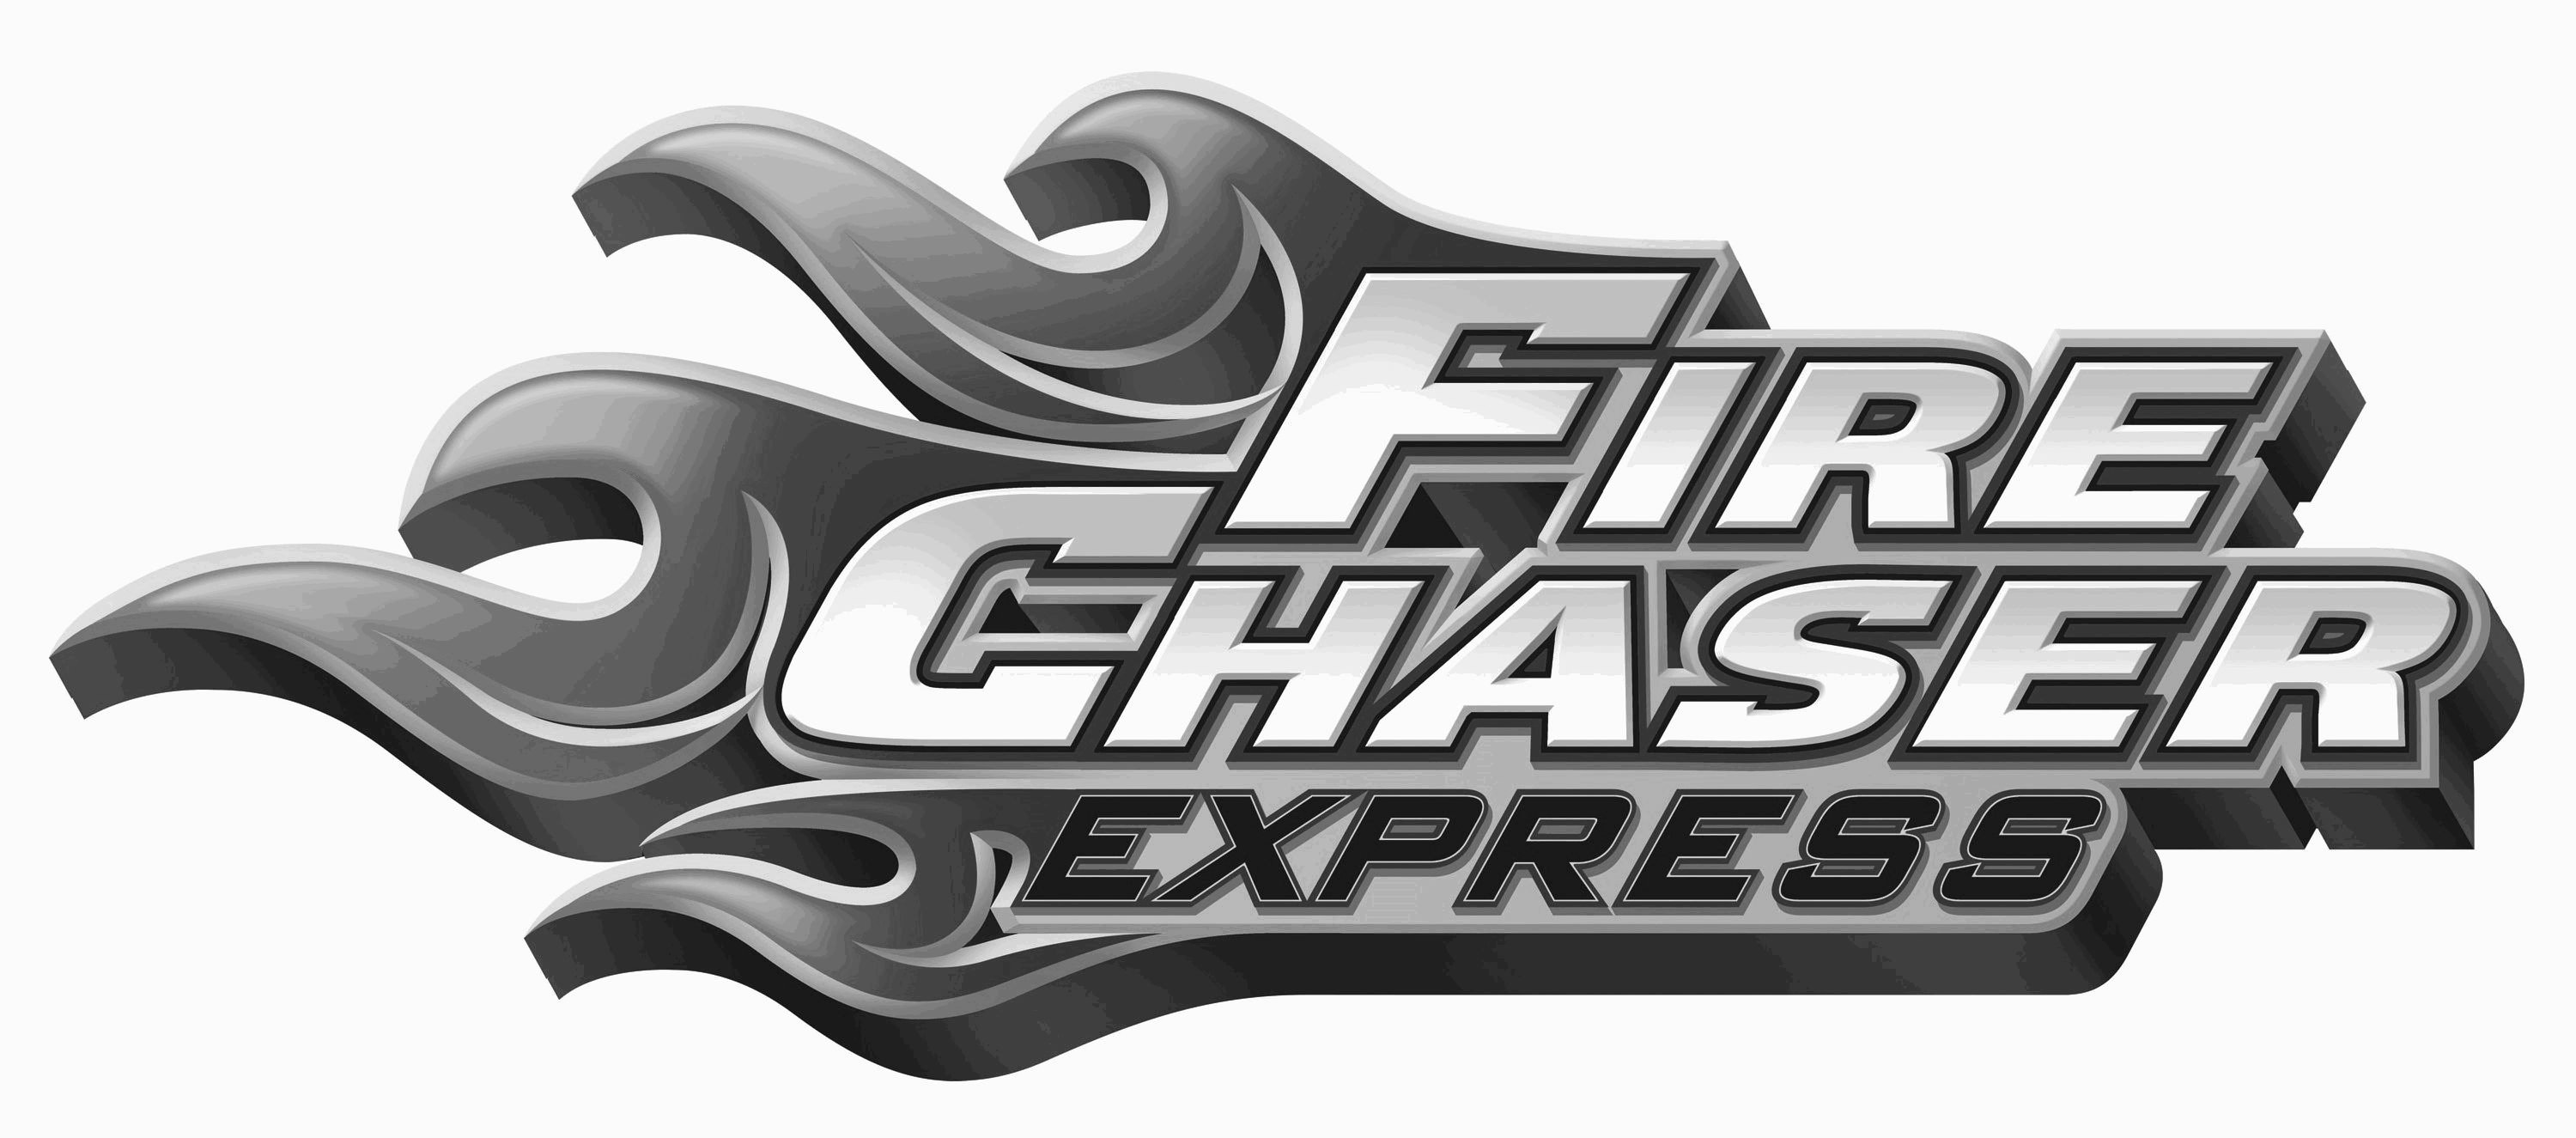  FIRE CHASER EXPRESS